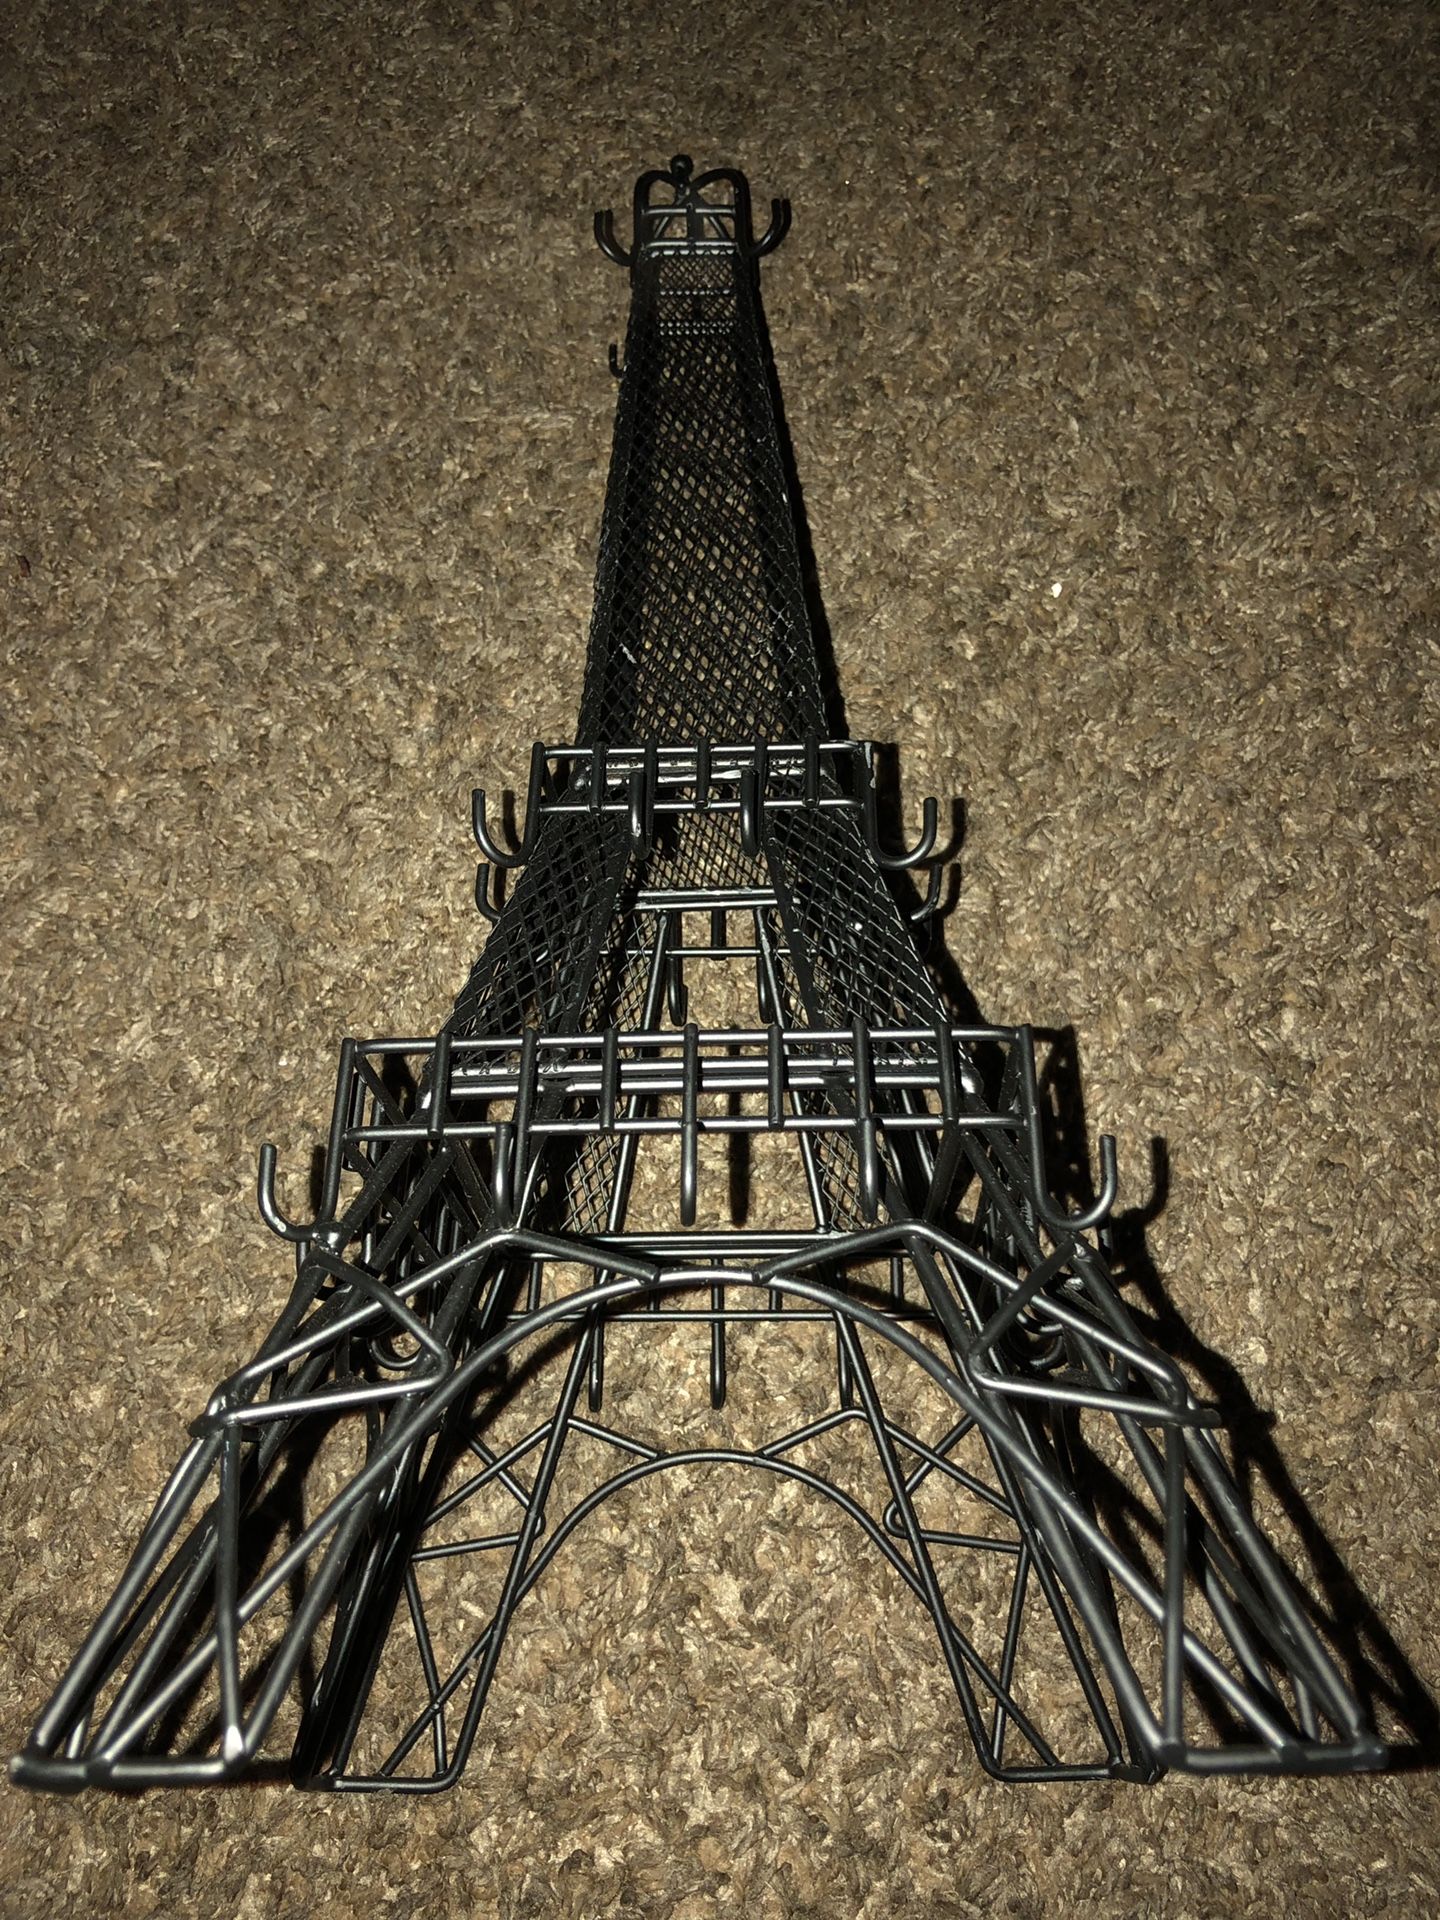 PARIS FRENCH EIFFEL TOWER STATUE NECKLACE HOOKS EARRING HOLDER JEWELRY STAND ORGANIZER... APPROXIMATELY 16 INCHES HIGH AND 6 INCHES WIDE... NEW WITHO